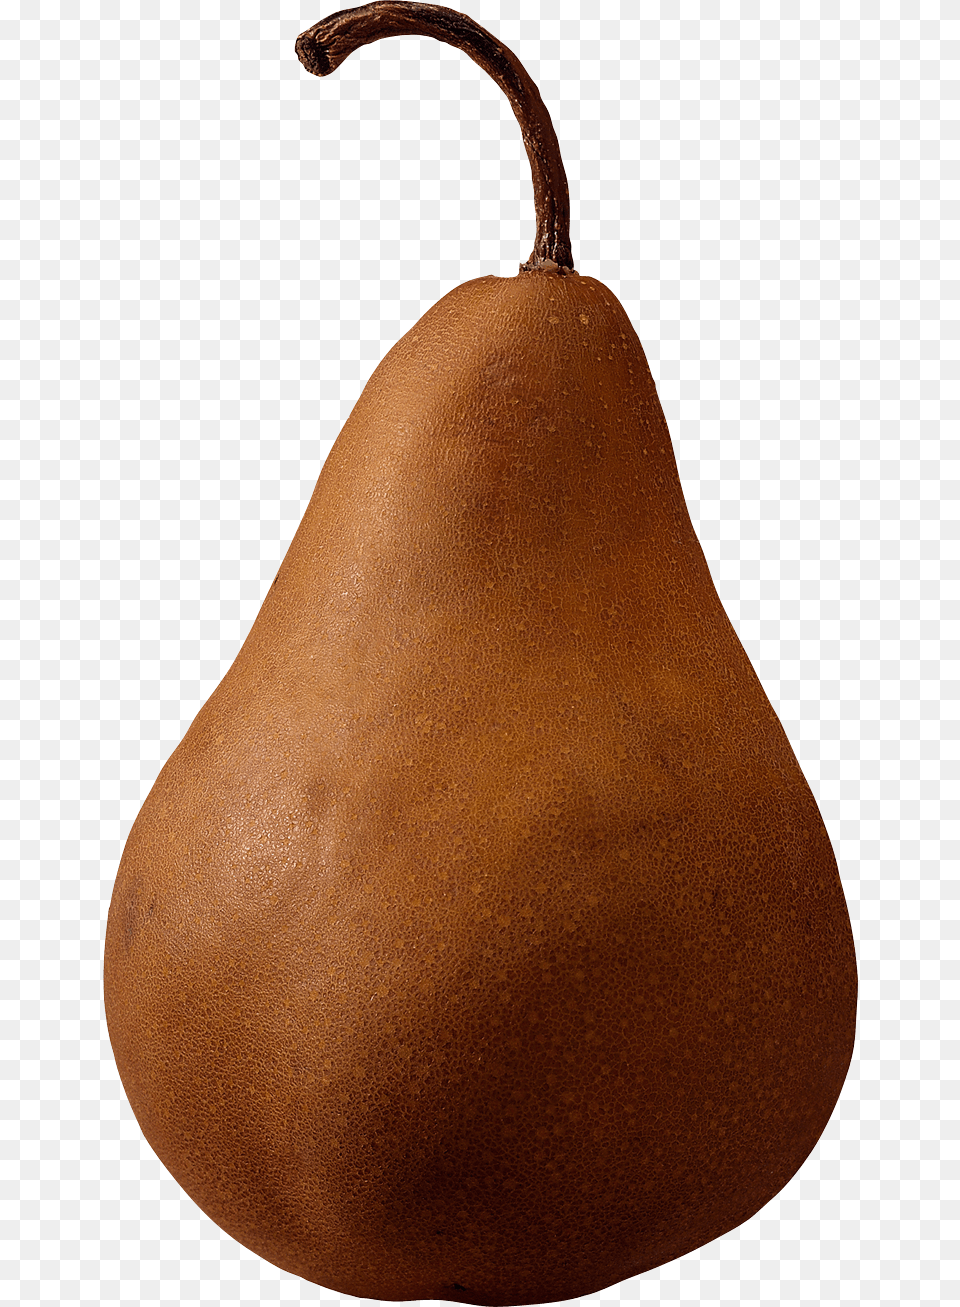 Pear, Food, Fruit, Plant, Produce Free Png